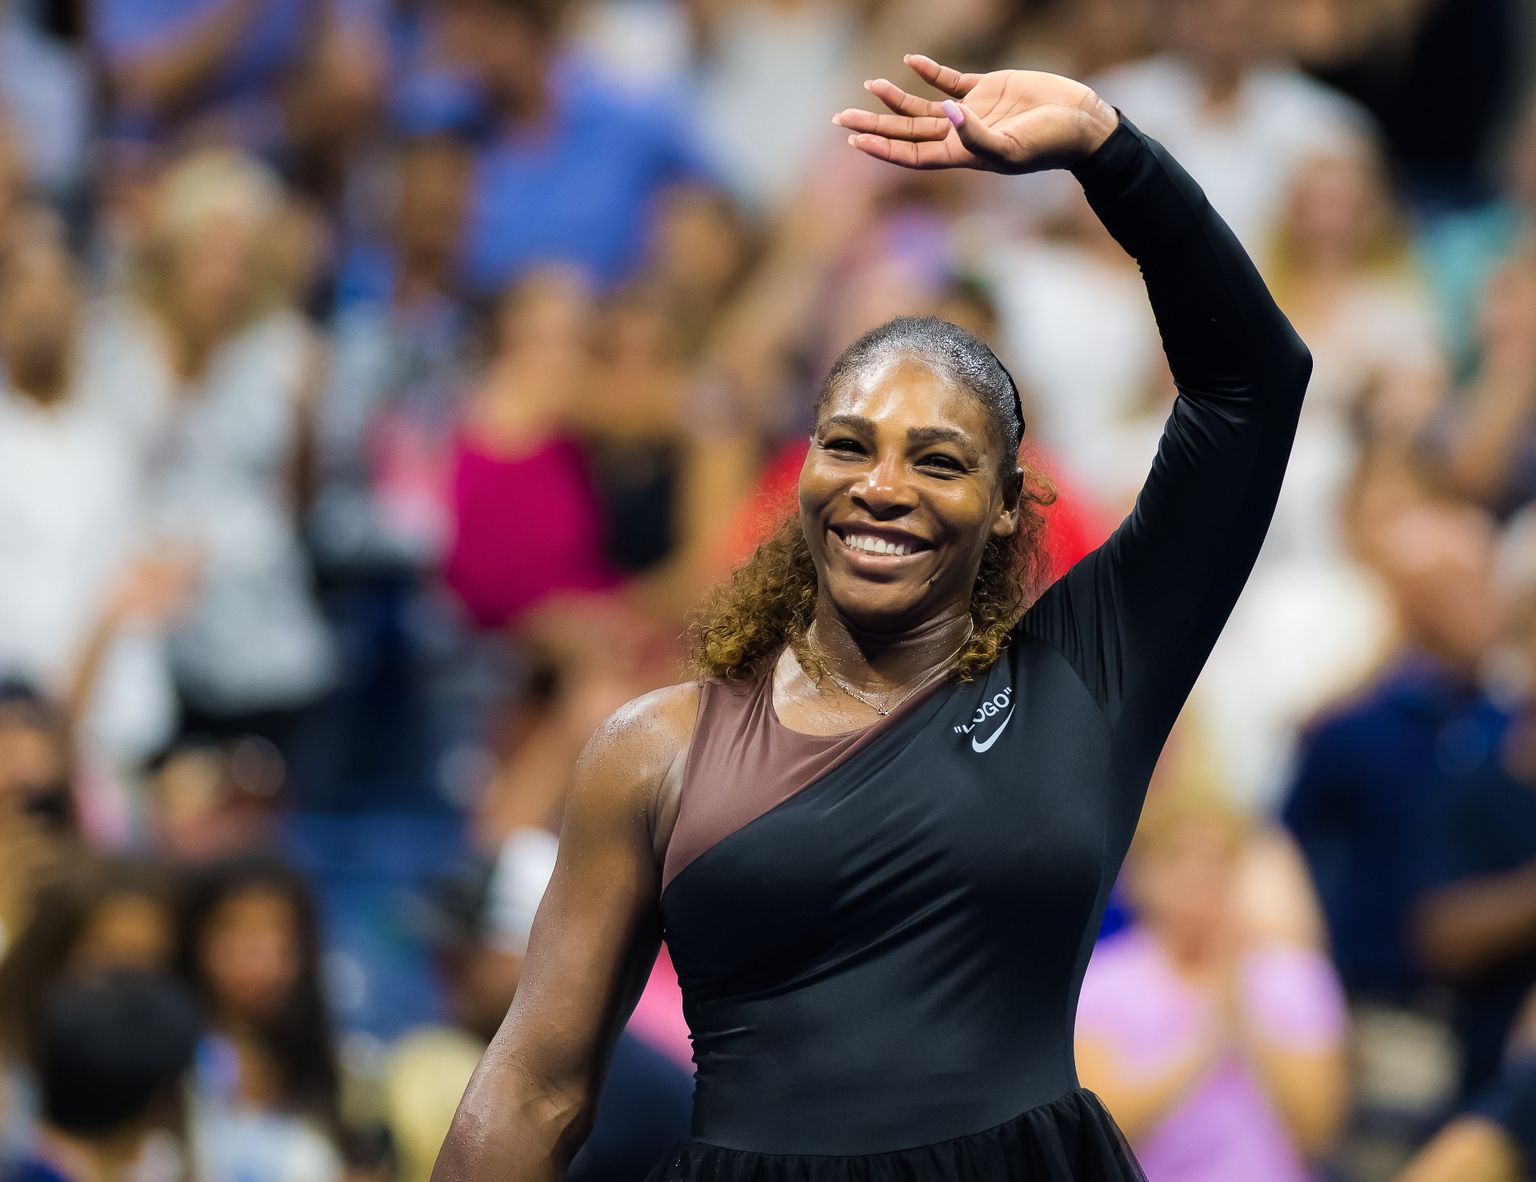 Serena Williams of the United States in action during the first round of the 2018 US Open Grand Slam tennis tournament. New York, USA. August 27th 2018. 27 Aug 2018 Pictured: Serena Williams of the United States in action during the first round of the 2018 US Open Grand Slam tennis tournament. New York, USA. August 27th 2018. Photo credit: ZUMAPRESS.com / MEGA TheMegaAgency.com +1 888 505 6342